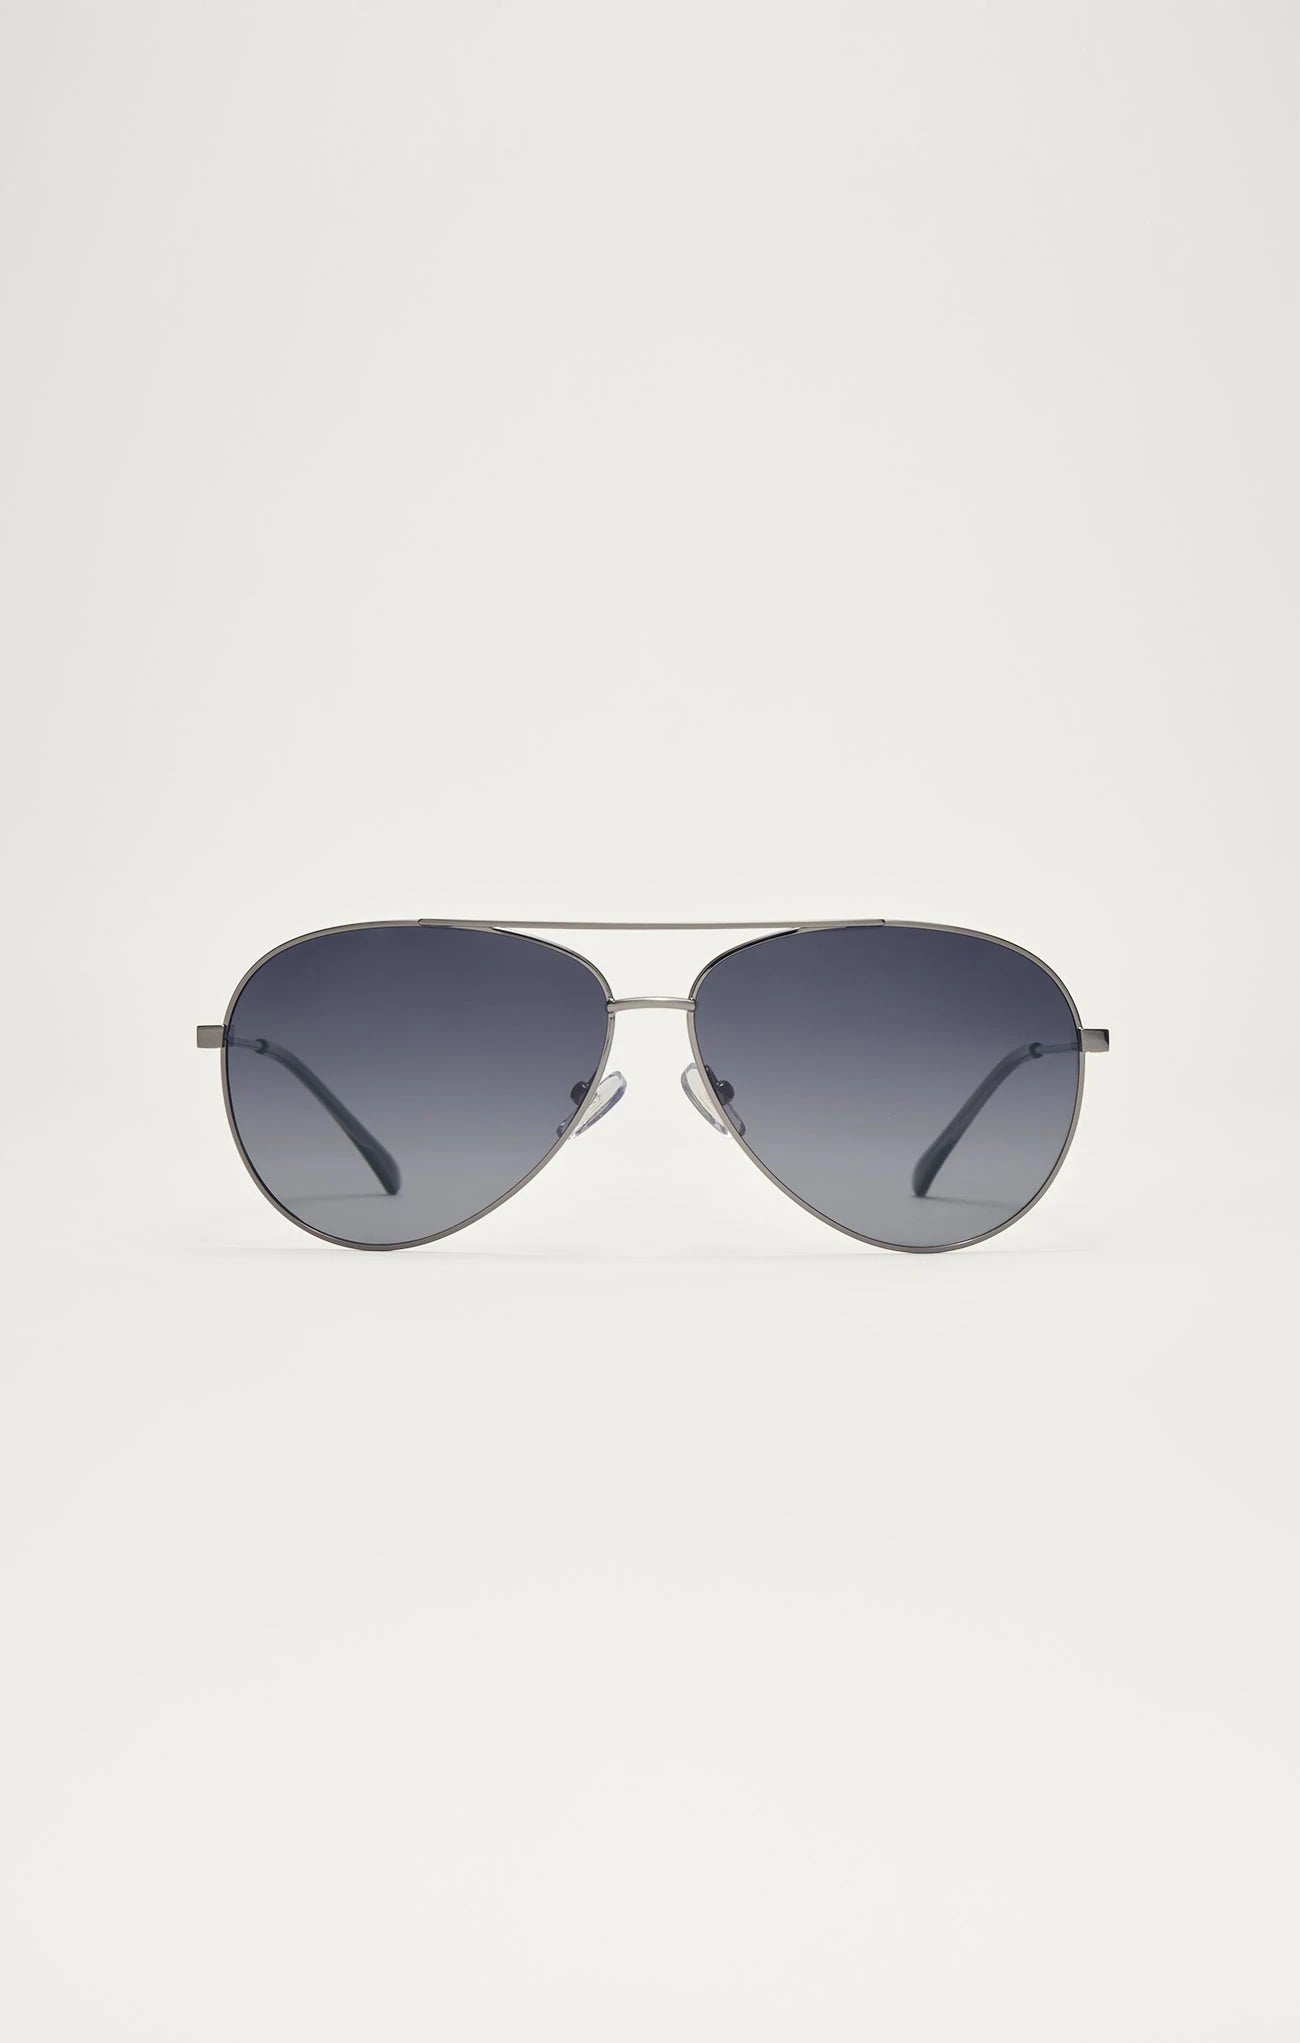 Z Supply Driver Sunnies